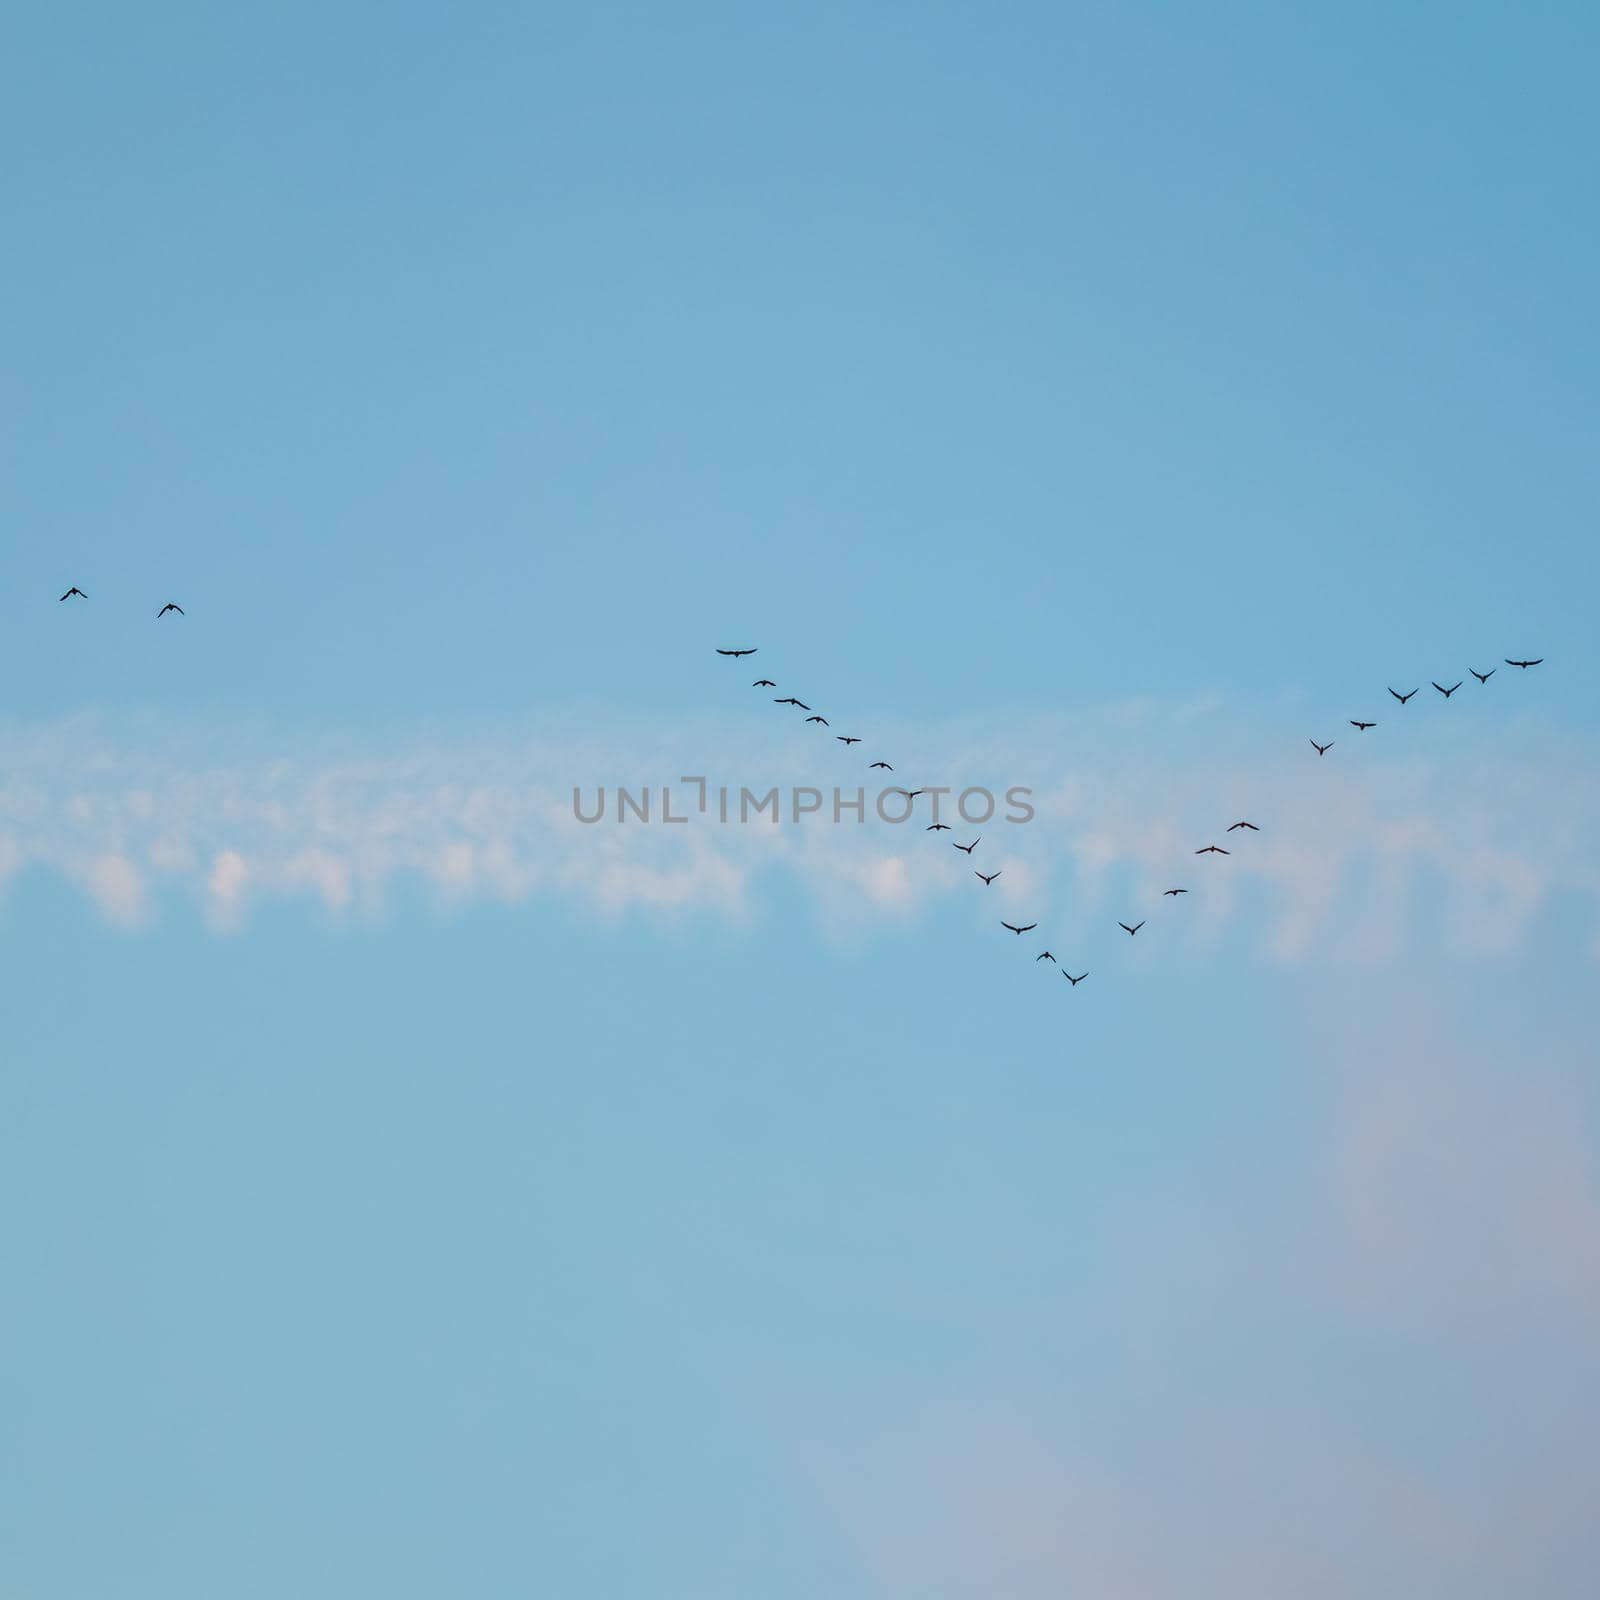 Flock of wild birds flying in a wedge against blue sky with white and pink clouds in sunset by Olayola